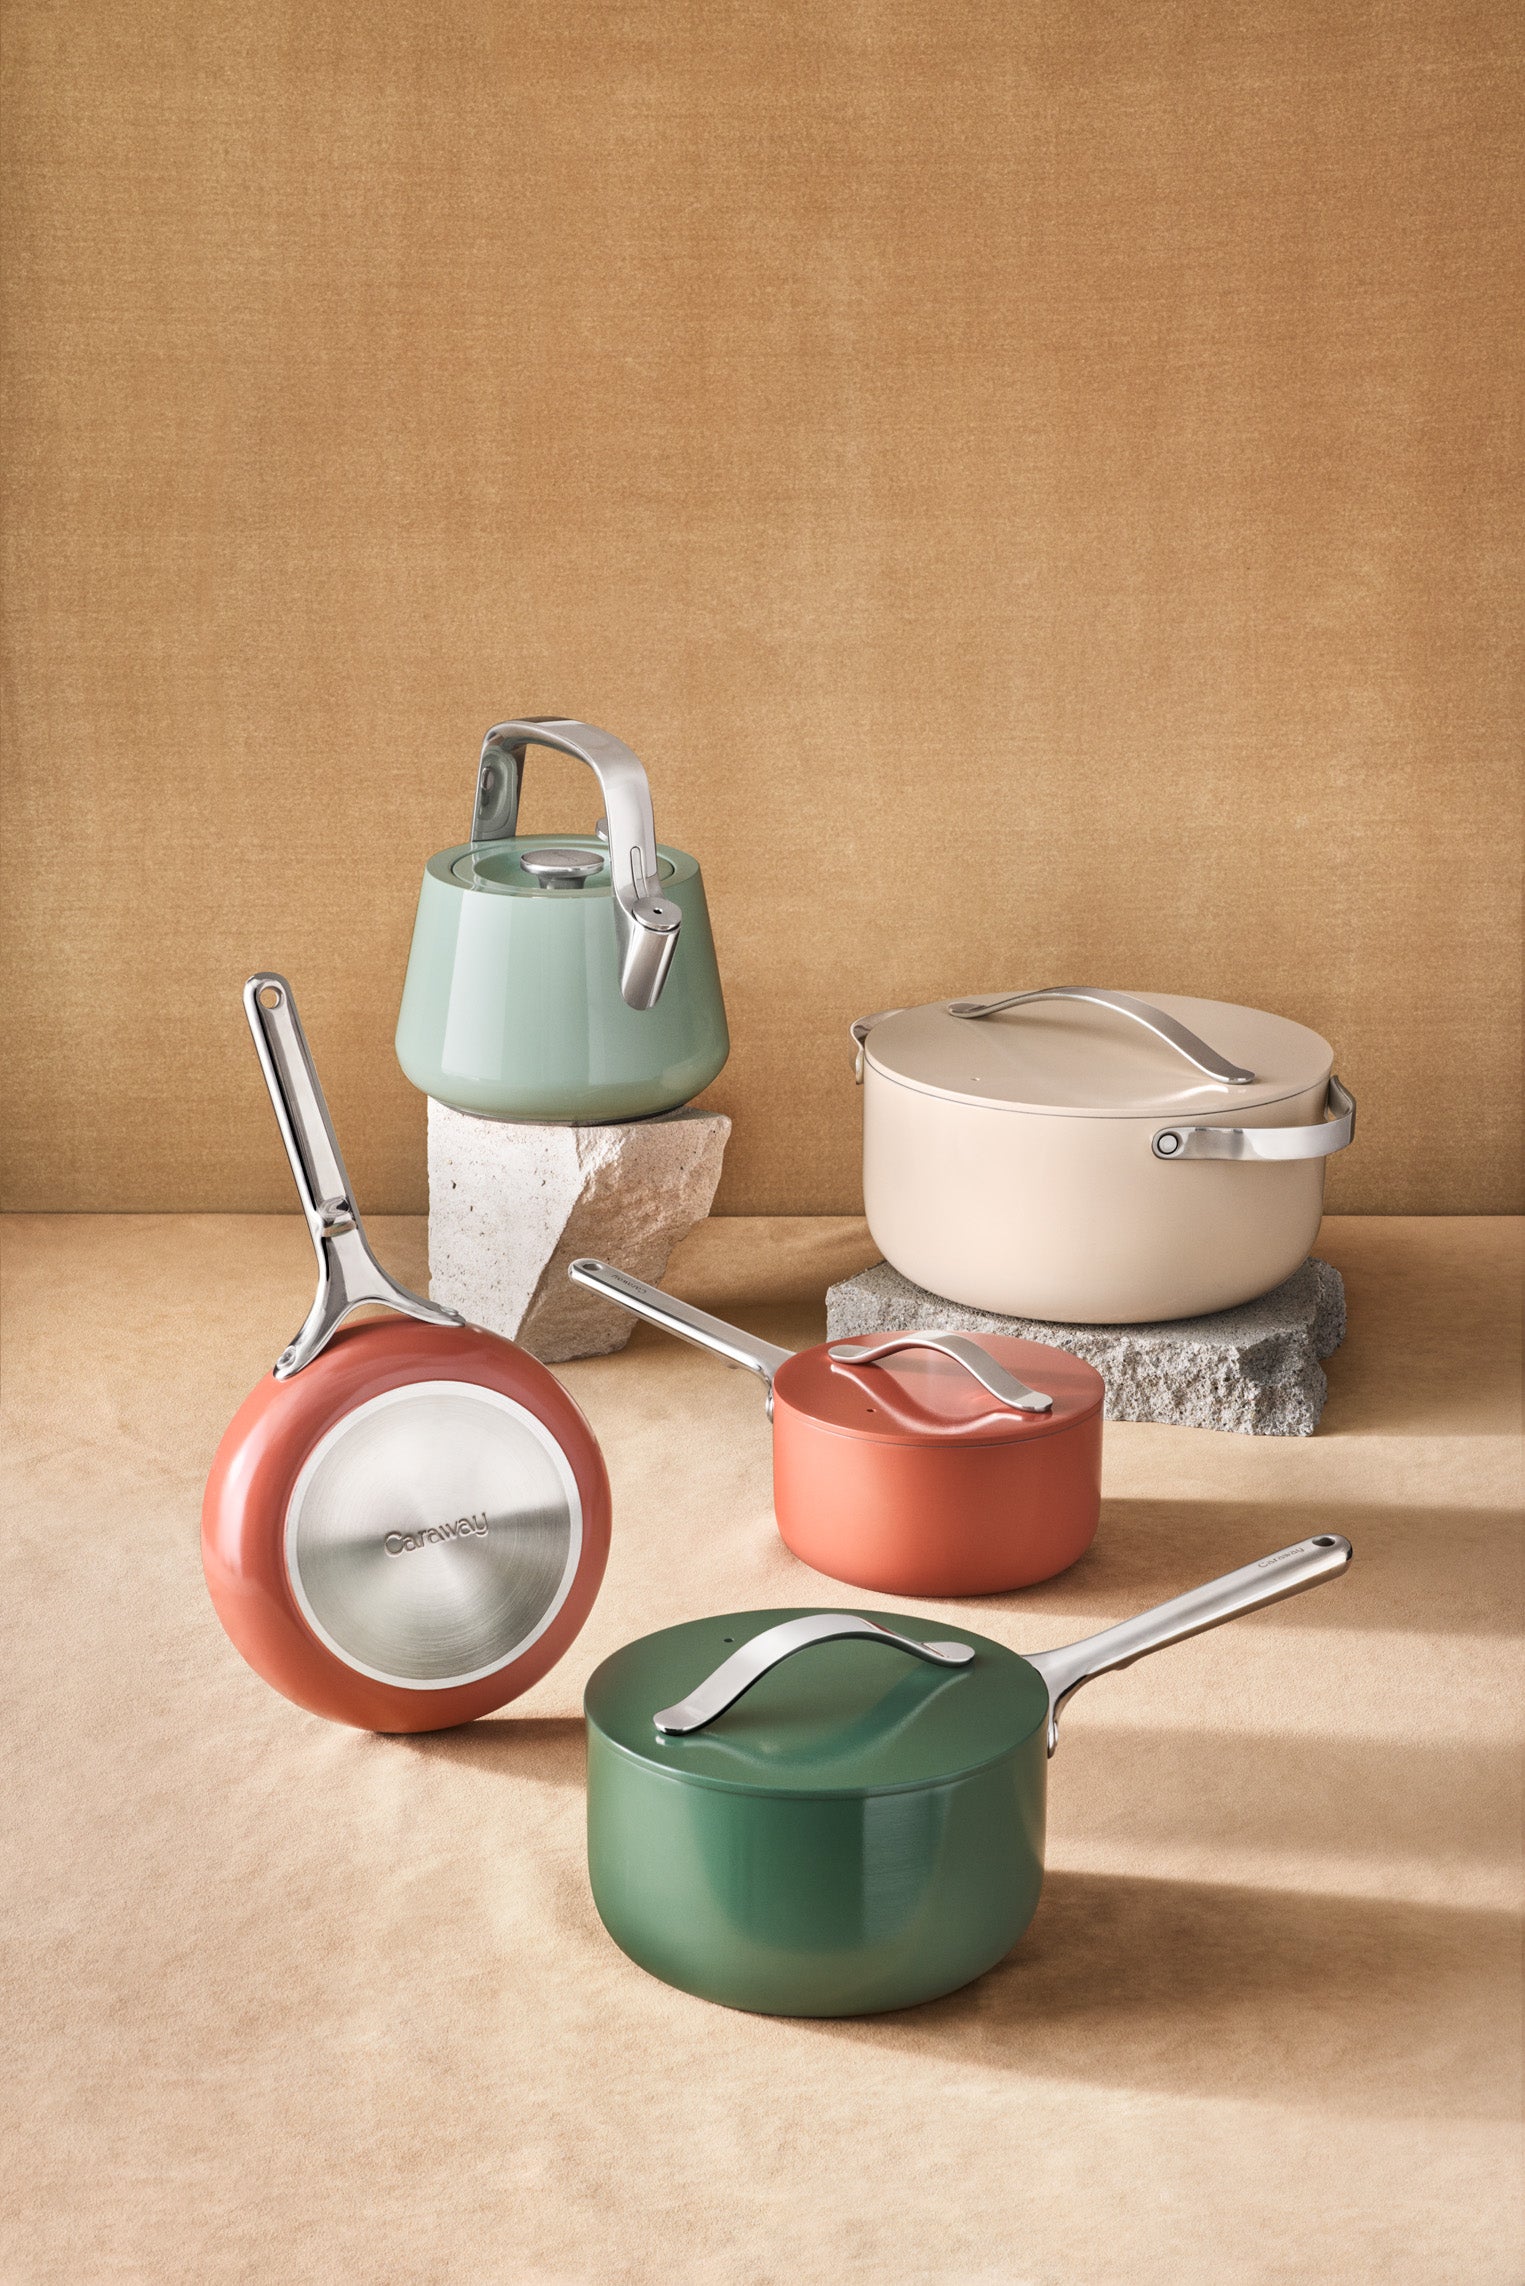 The Ultimate Cookware Sale From Caraway